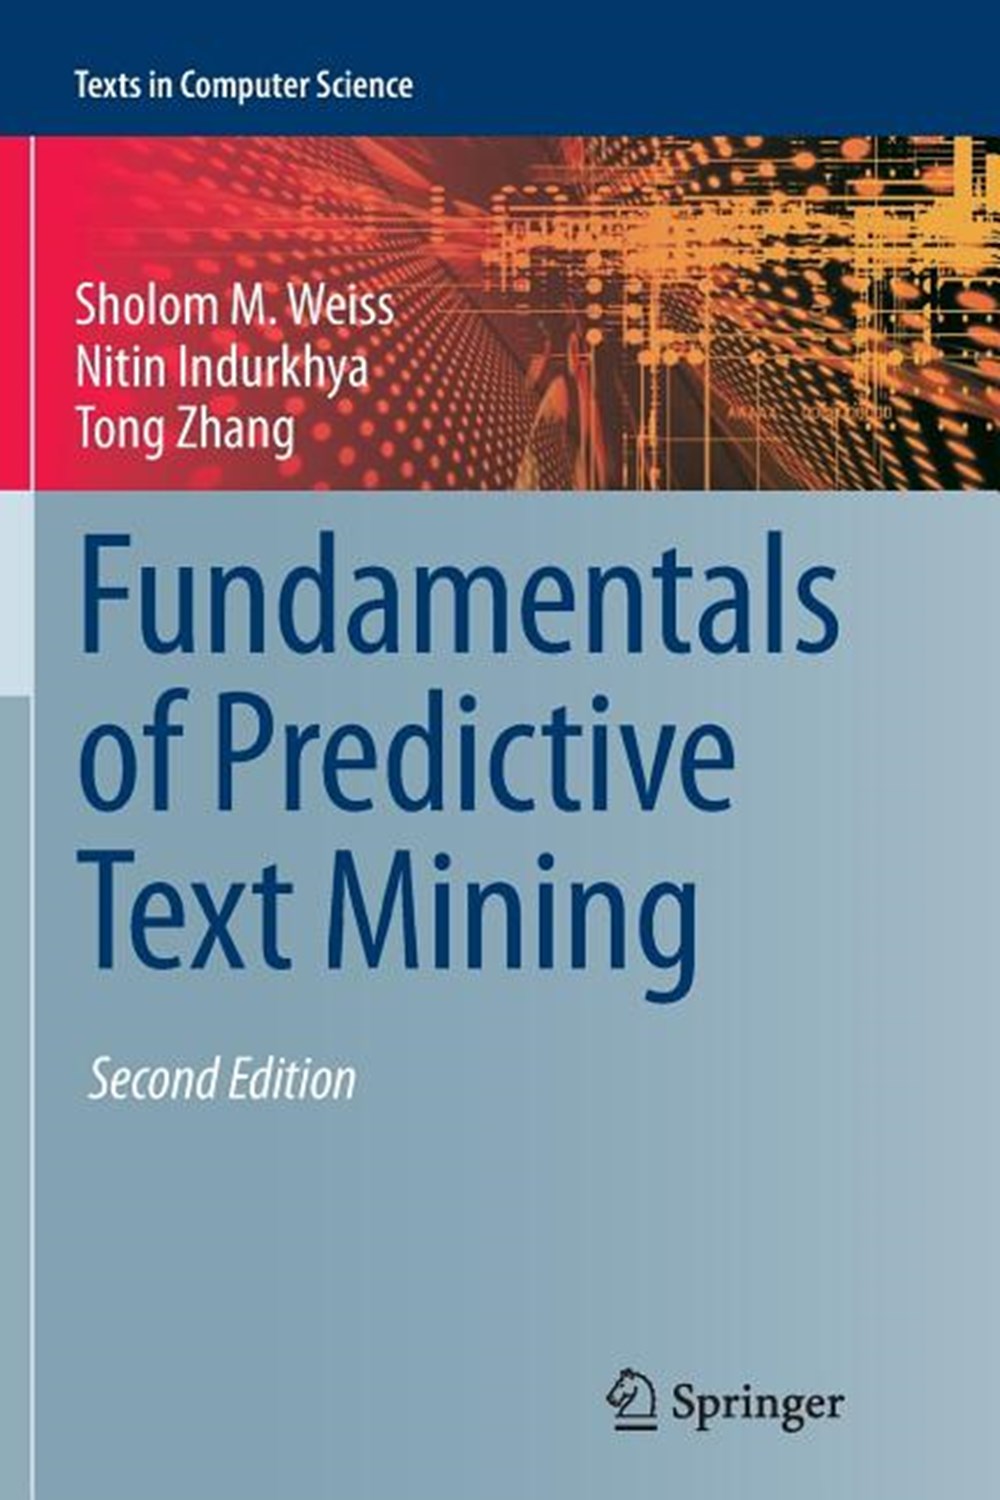 text mining related research paper